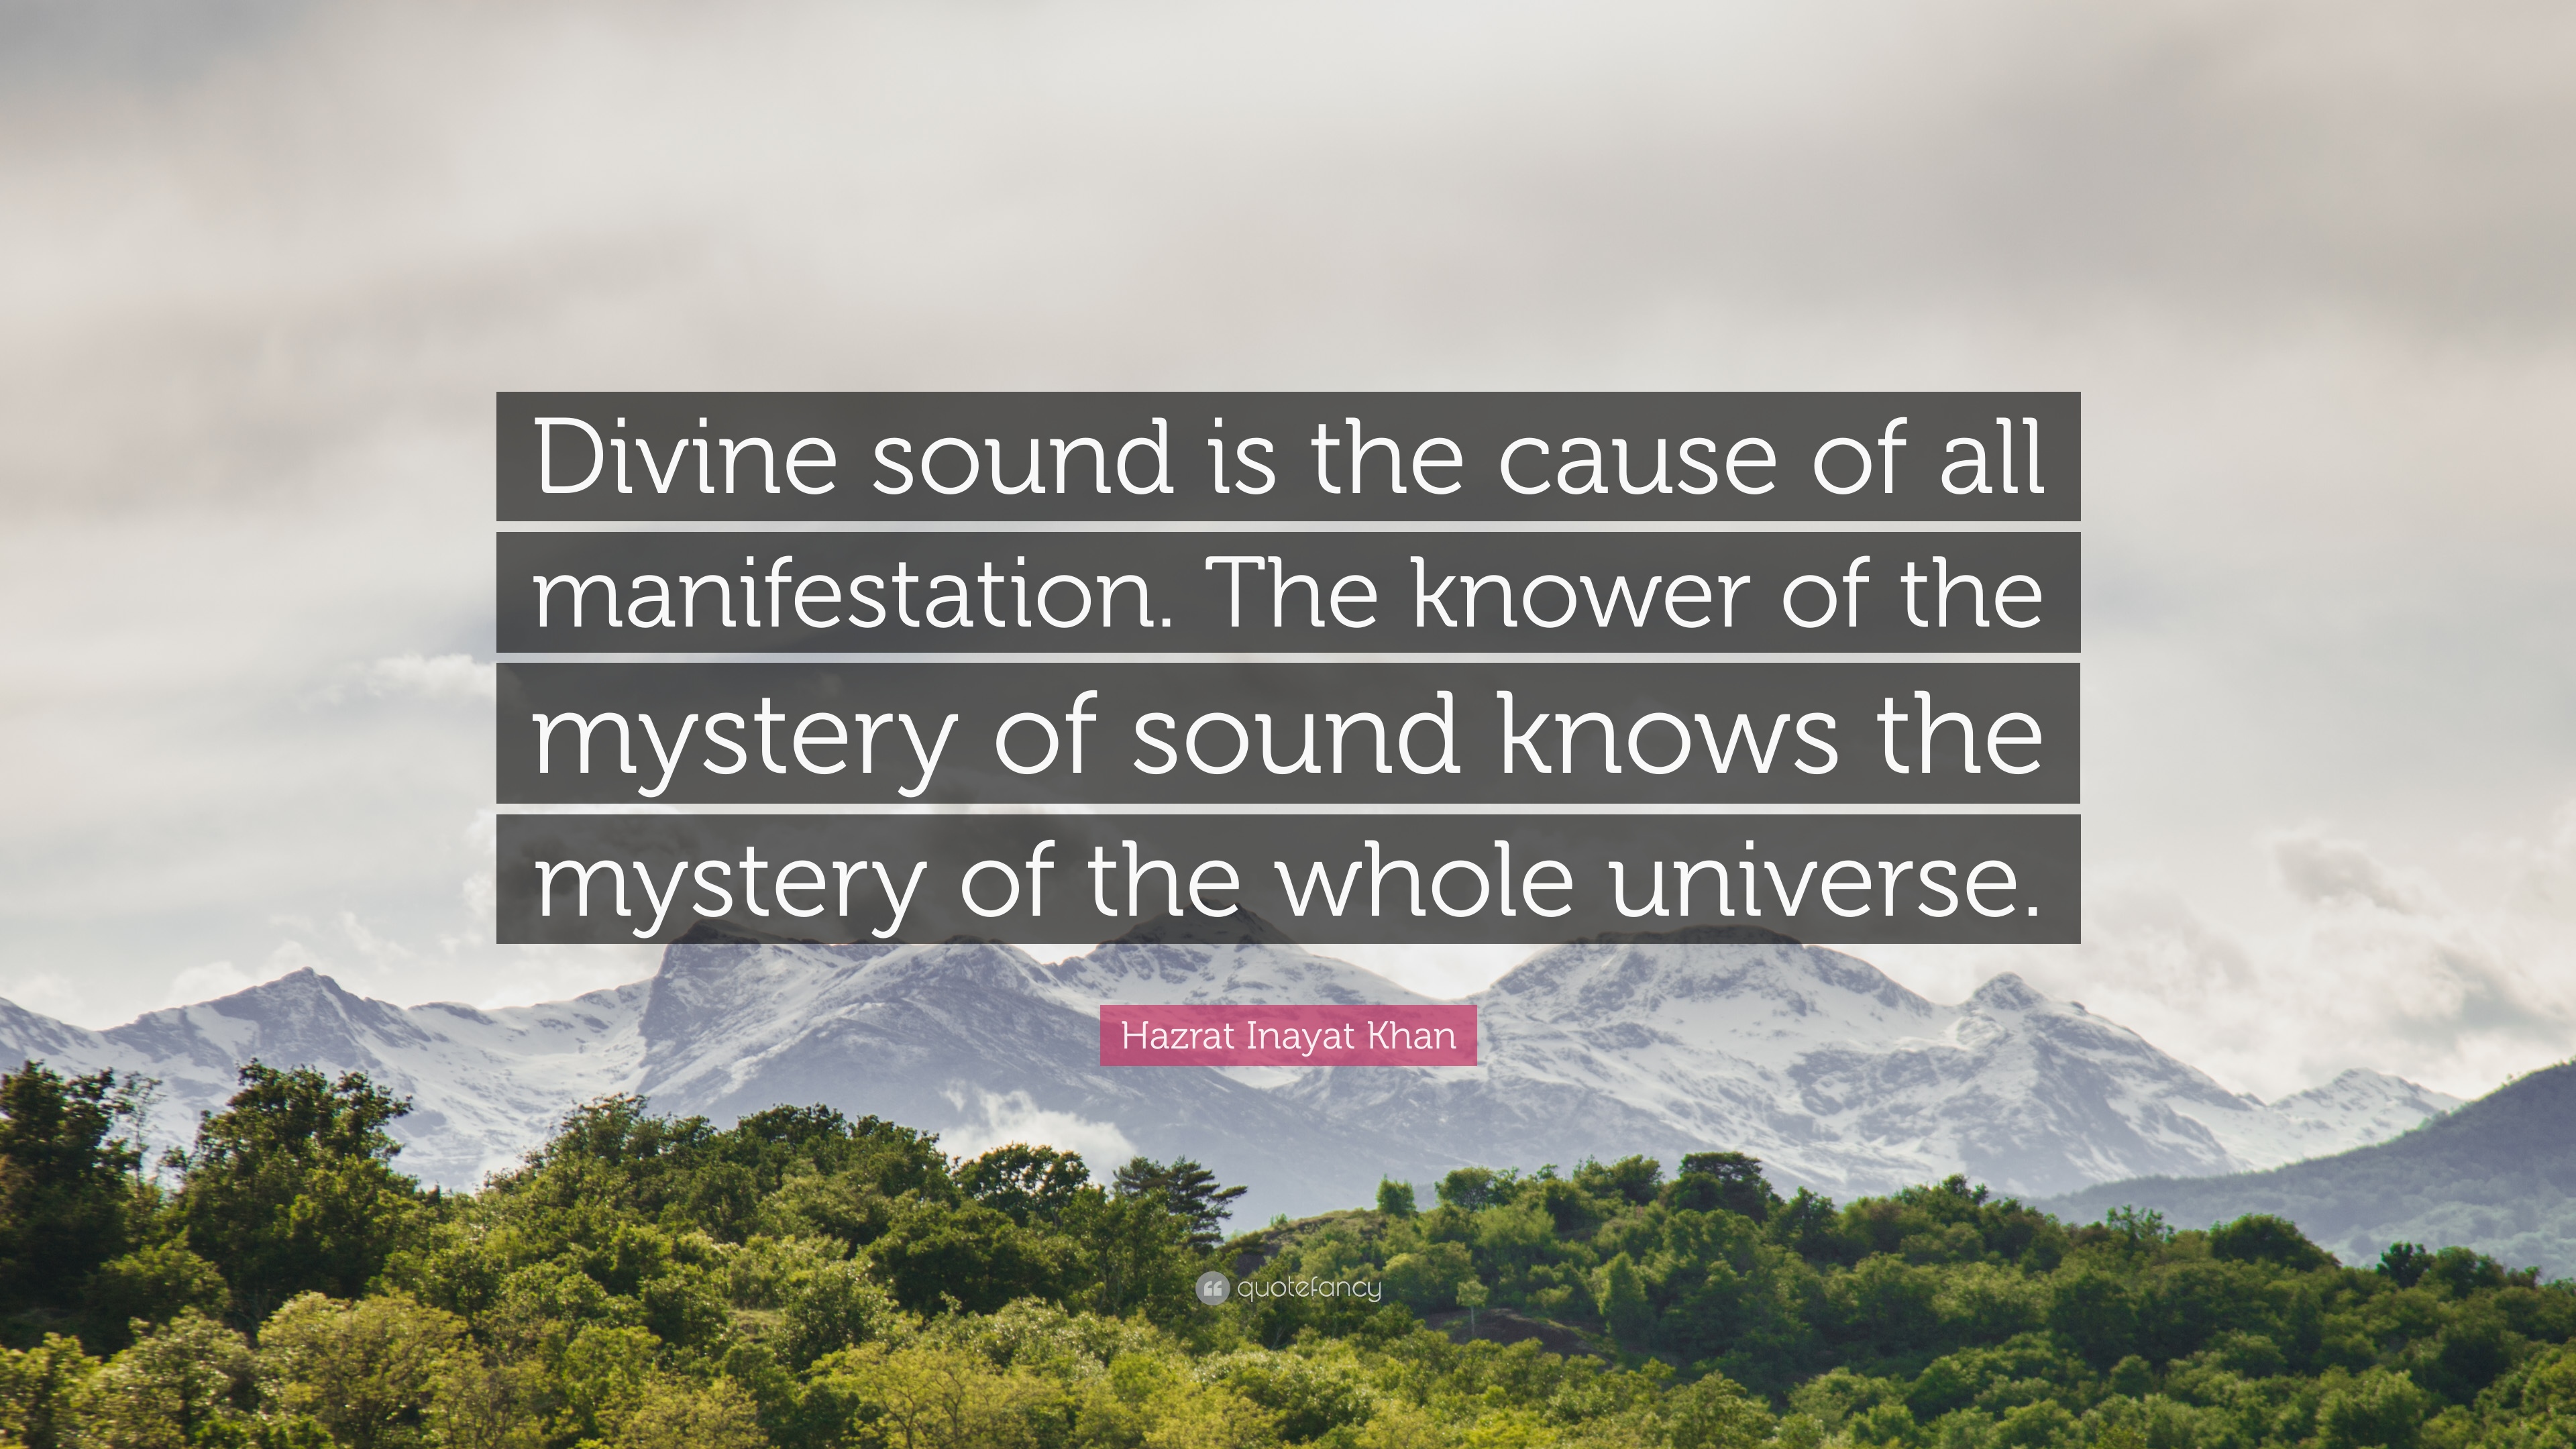 672043-Hazrat-Inayat-Khan-Quote-Divine-sound-is-the-cause-of-all.jpg